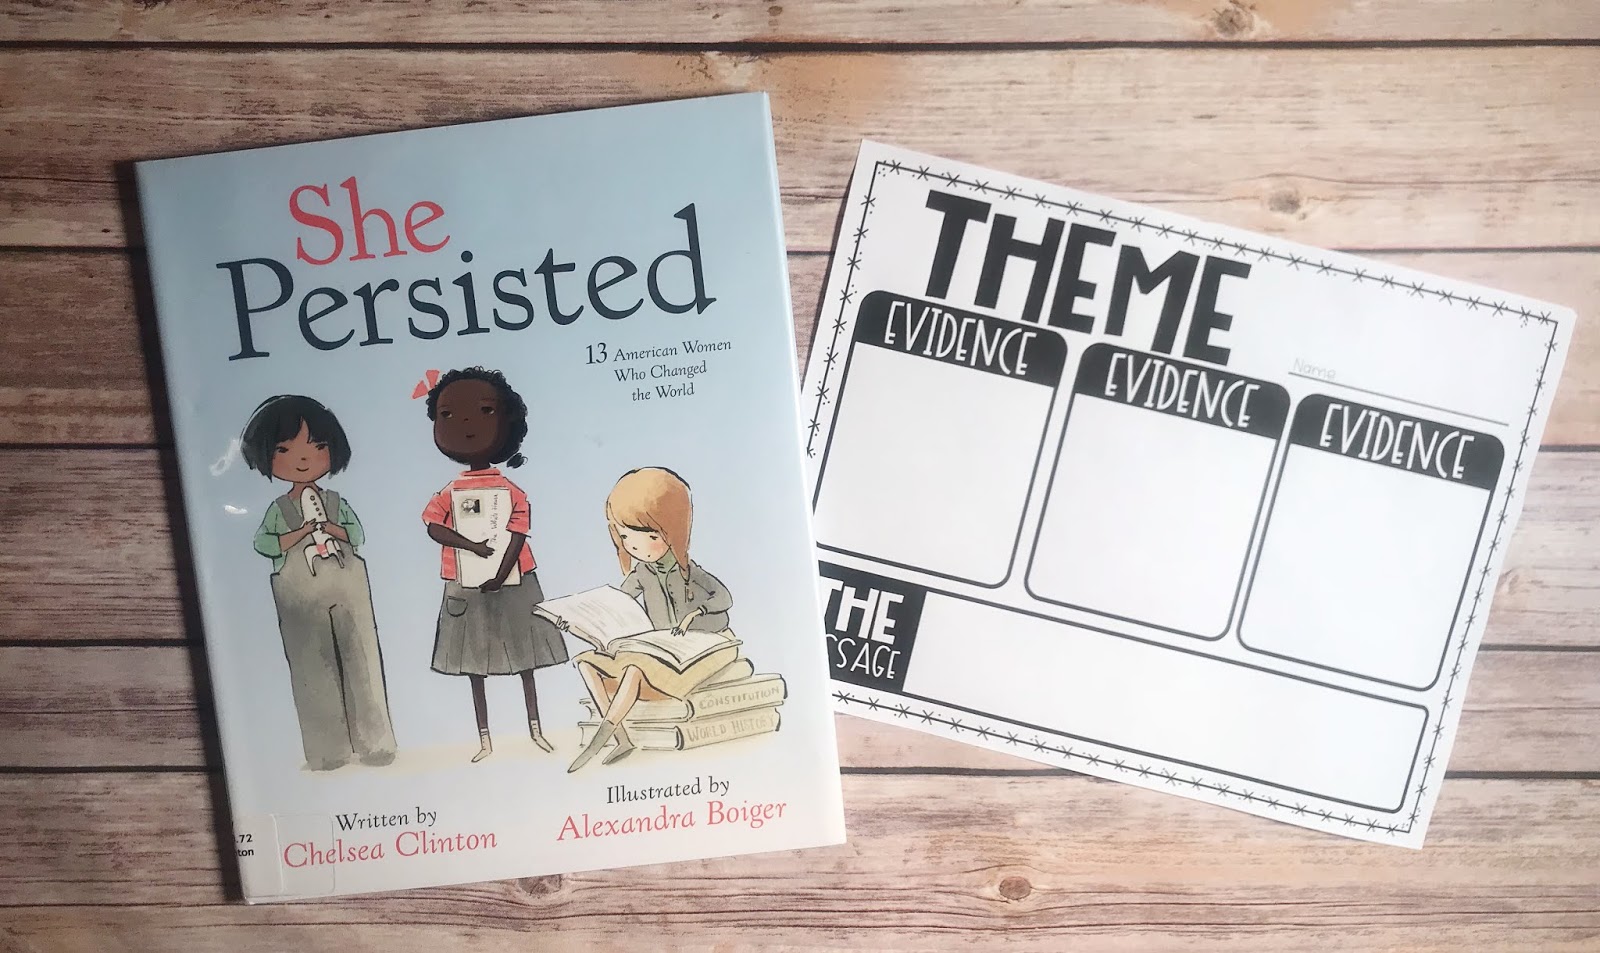 Mentor Text with text "She Persisted" and Graphic Organizer with text "Theme"